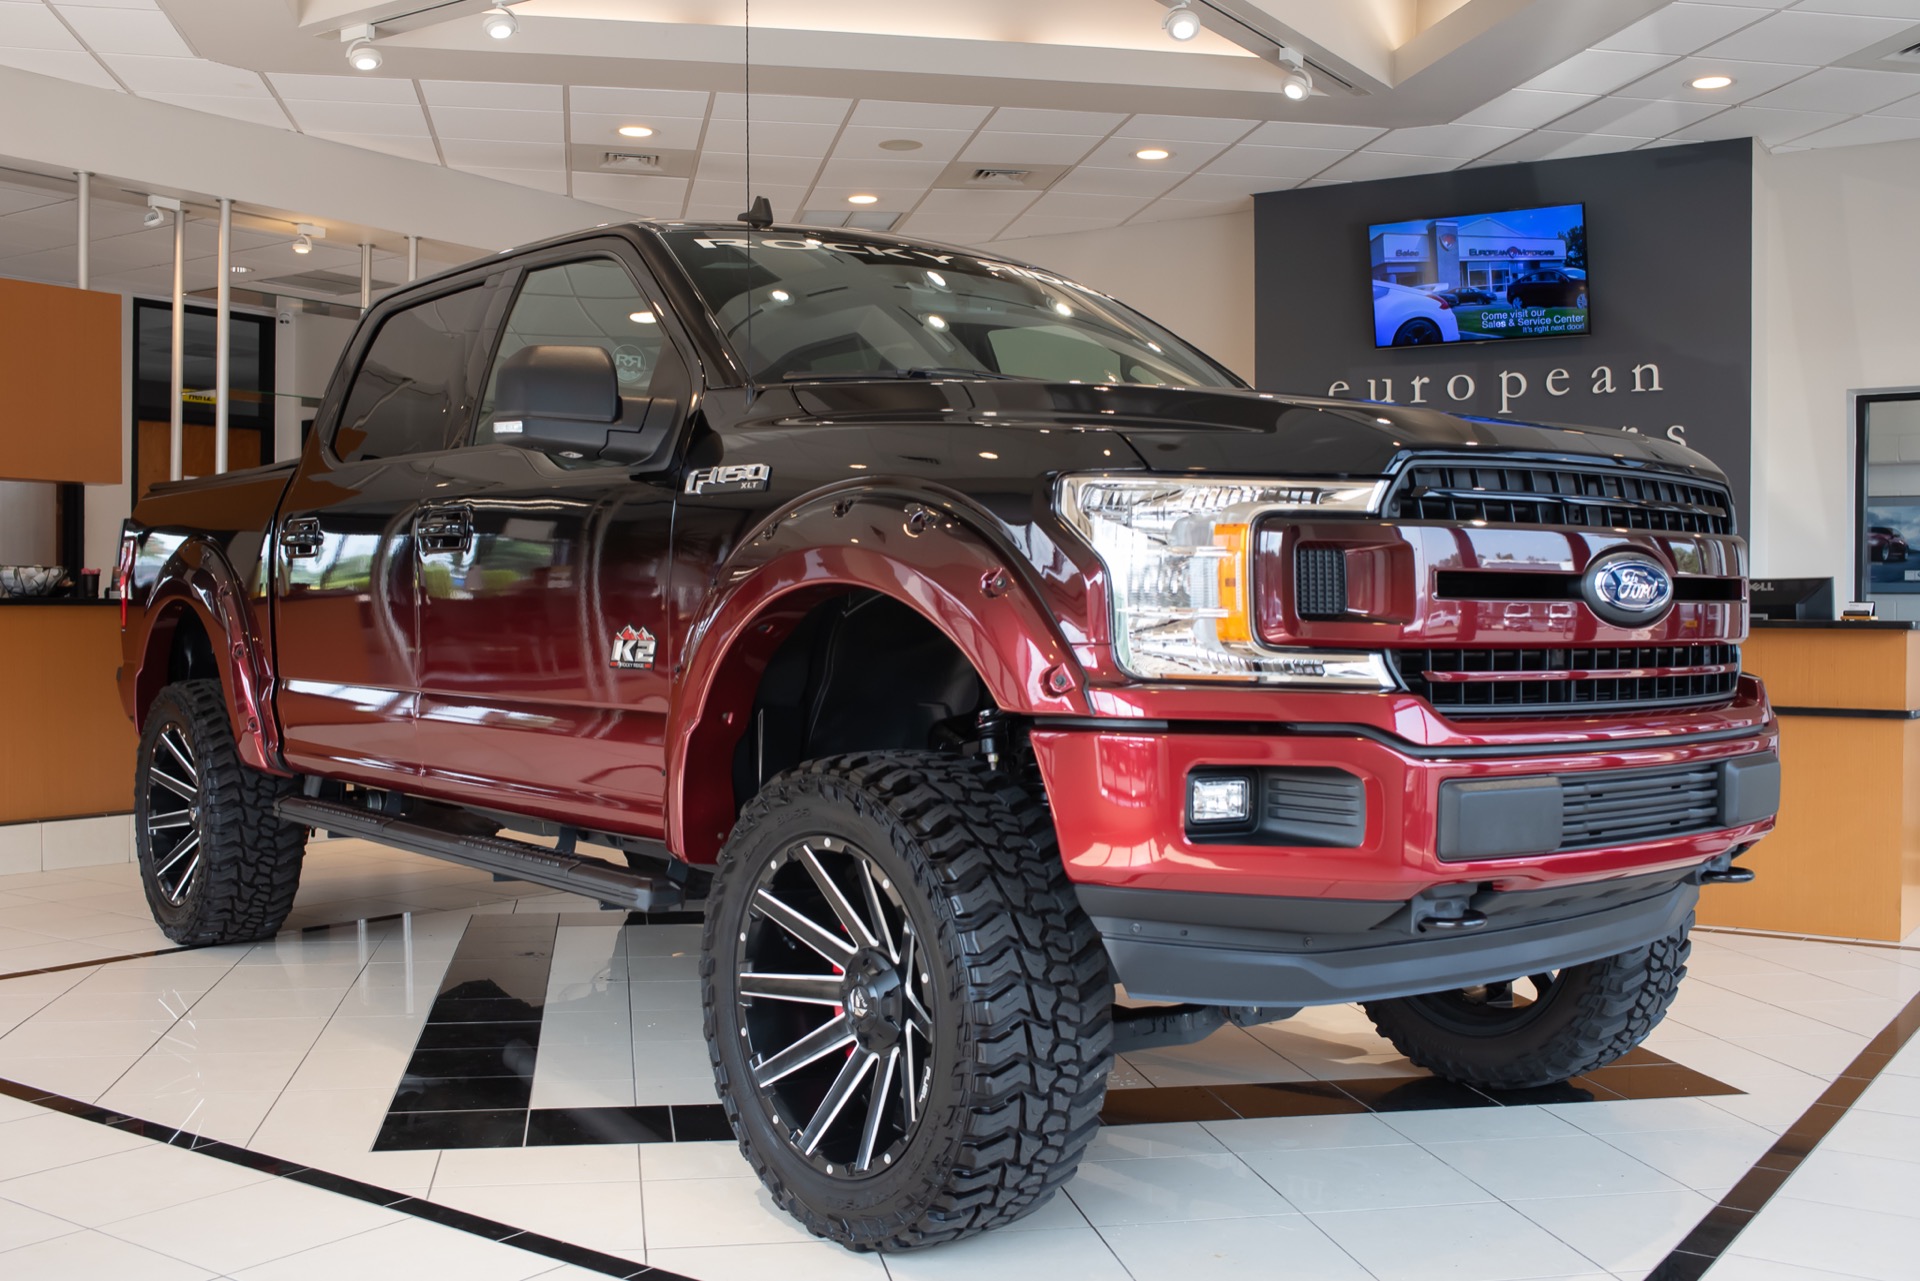 2019 Ford F-150 ROCKY RIDGE CONVERSION XLT for sale near Middletown, CT